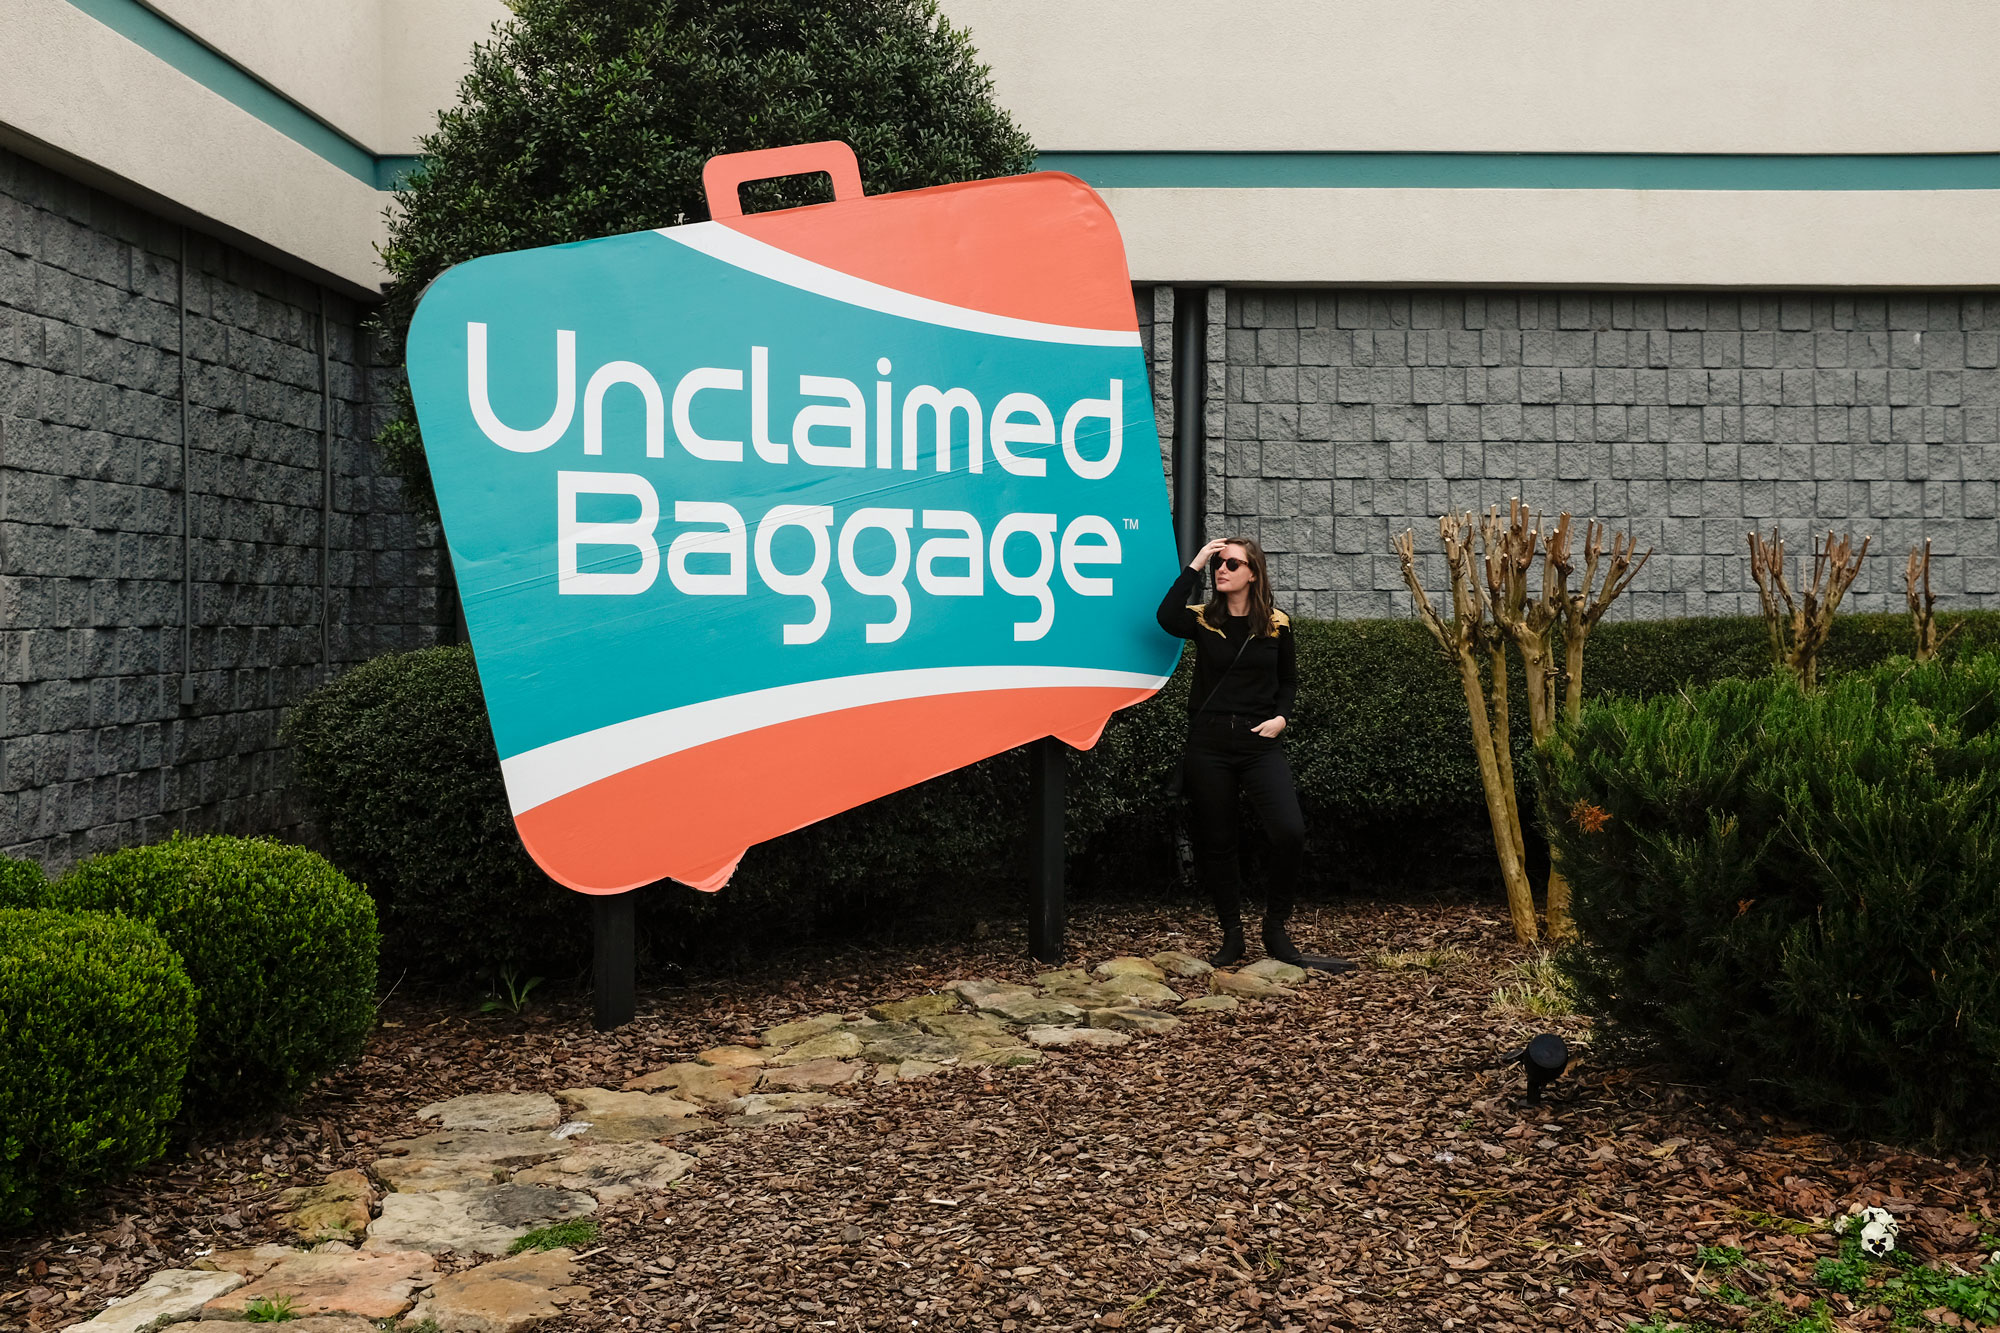 Alyssa standing in front of Unclaimed Baggage sign